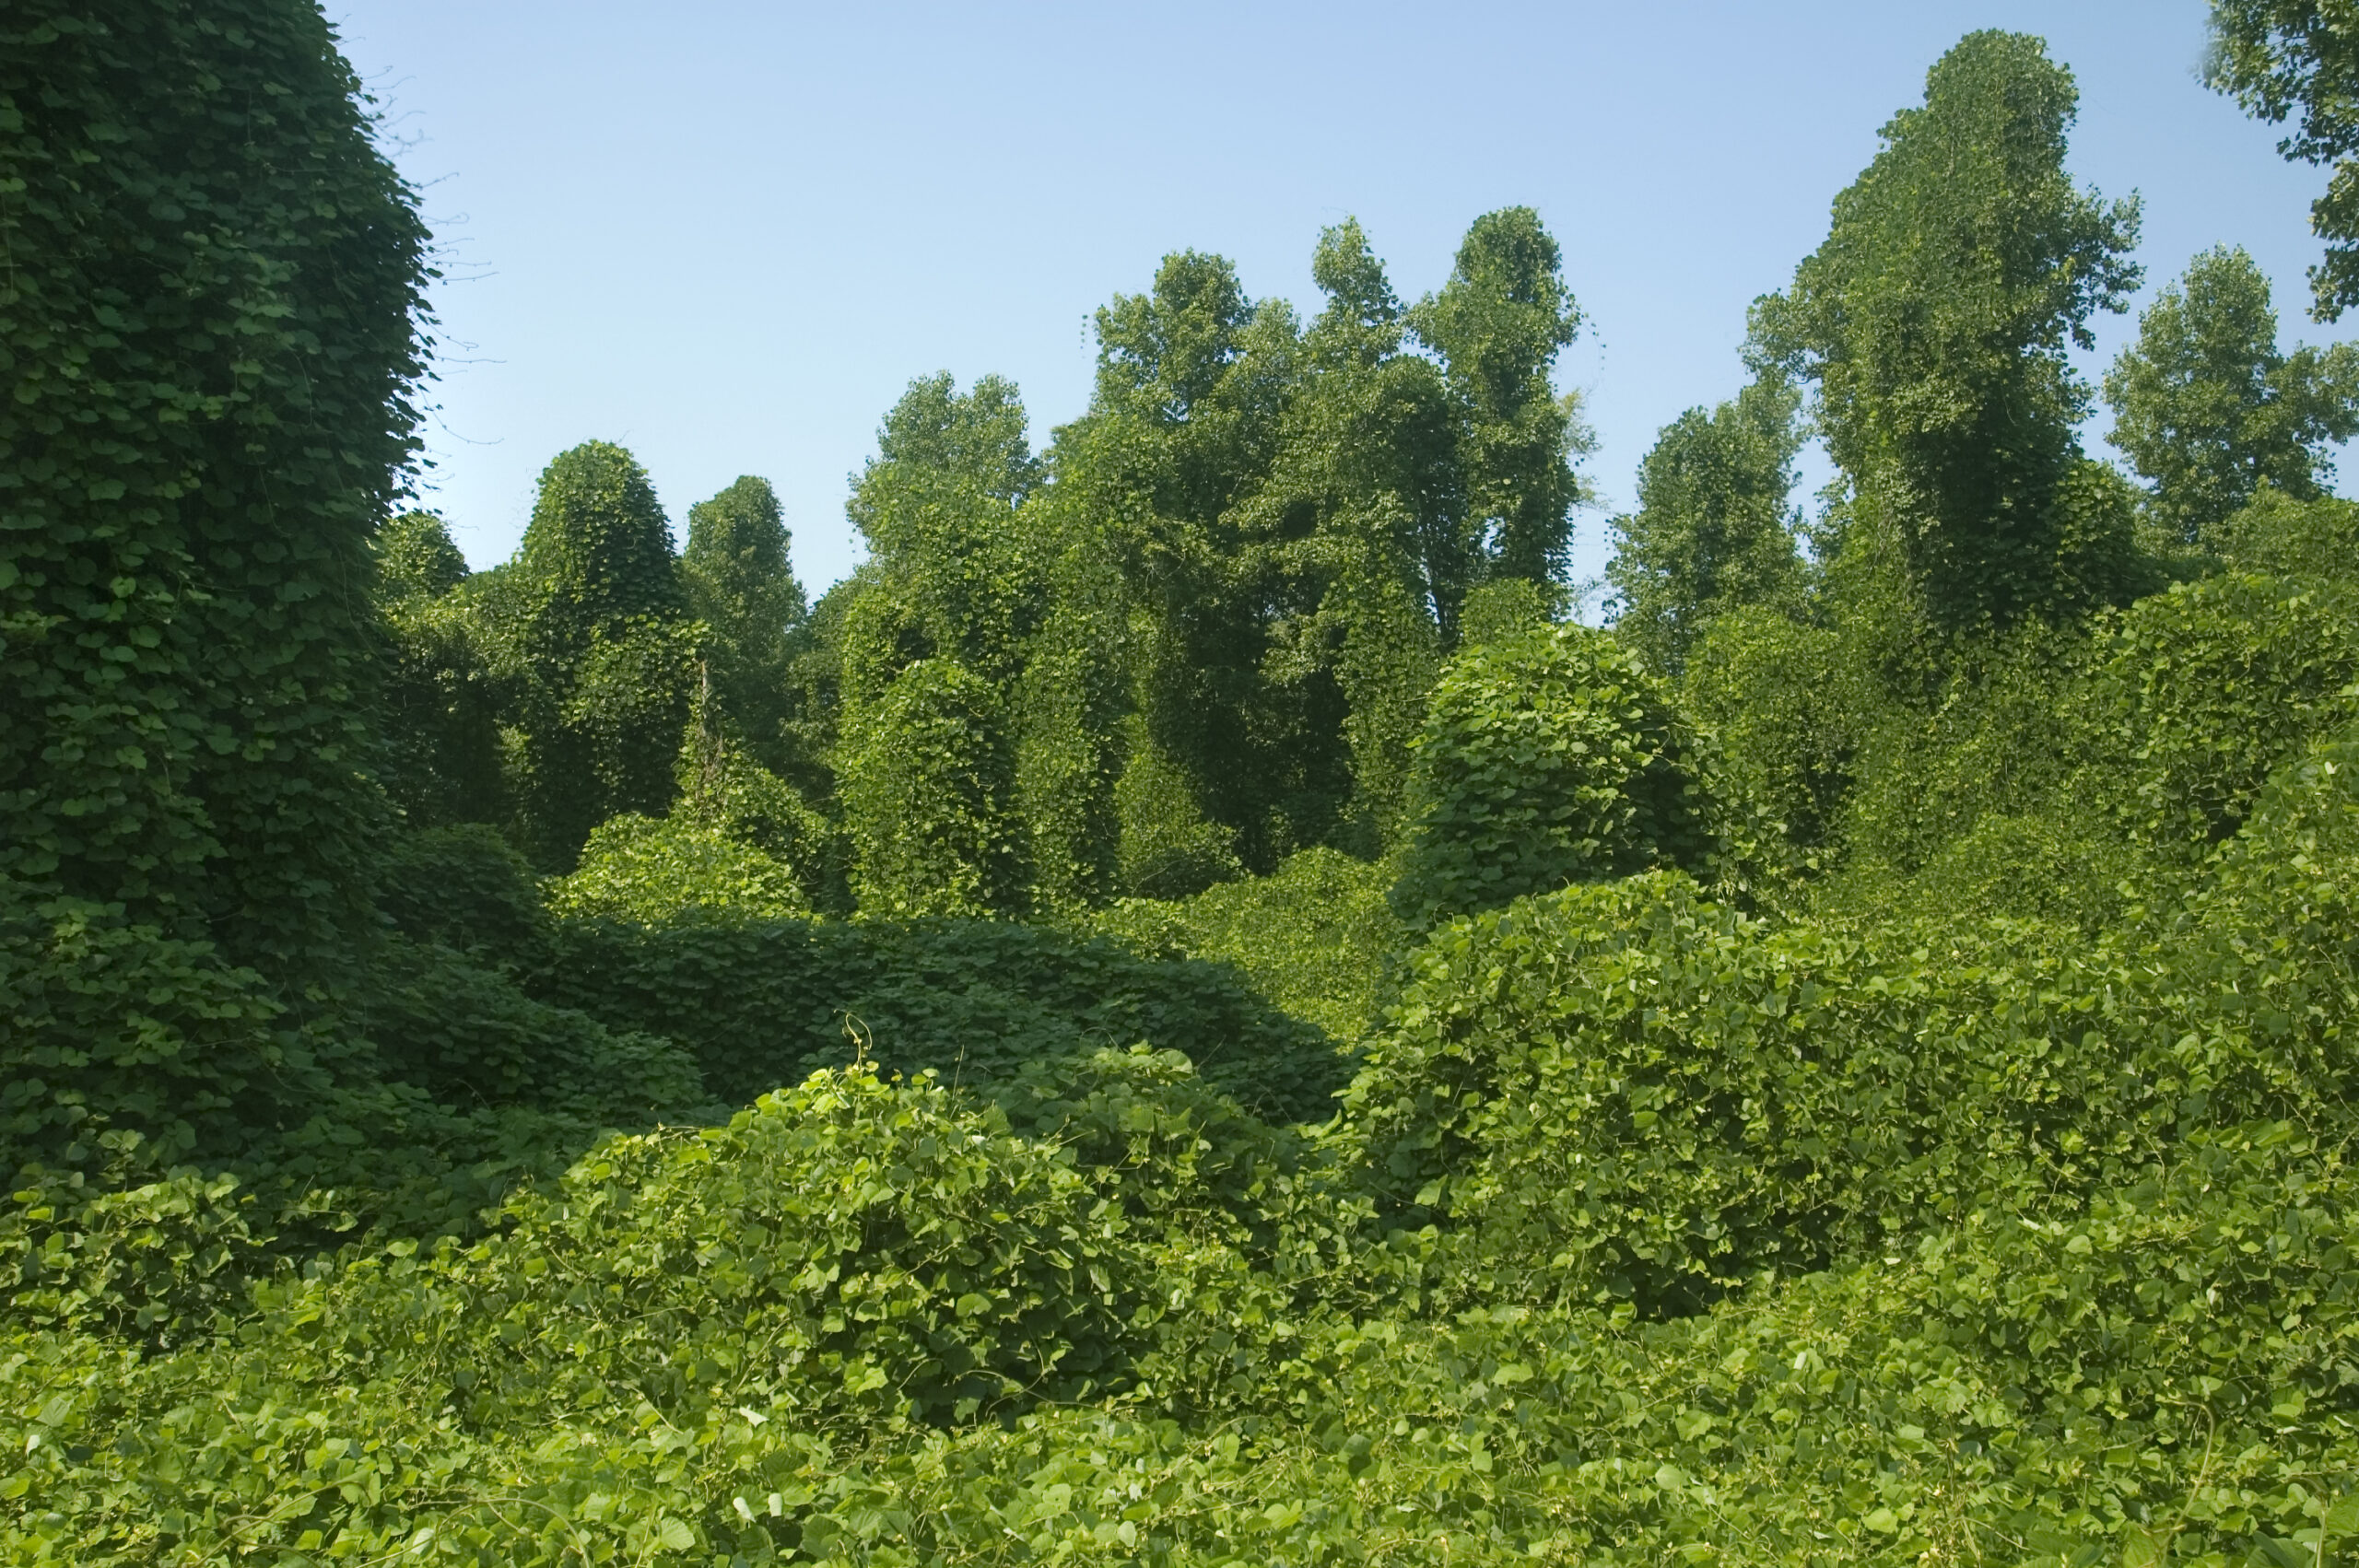 A plant called Kudzu blankets bushes, trees, and other plants in a forest